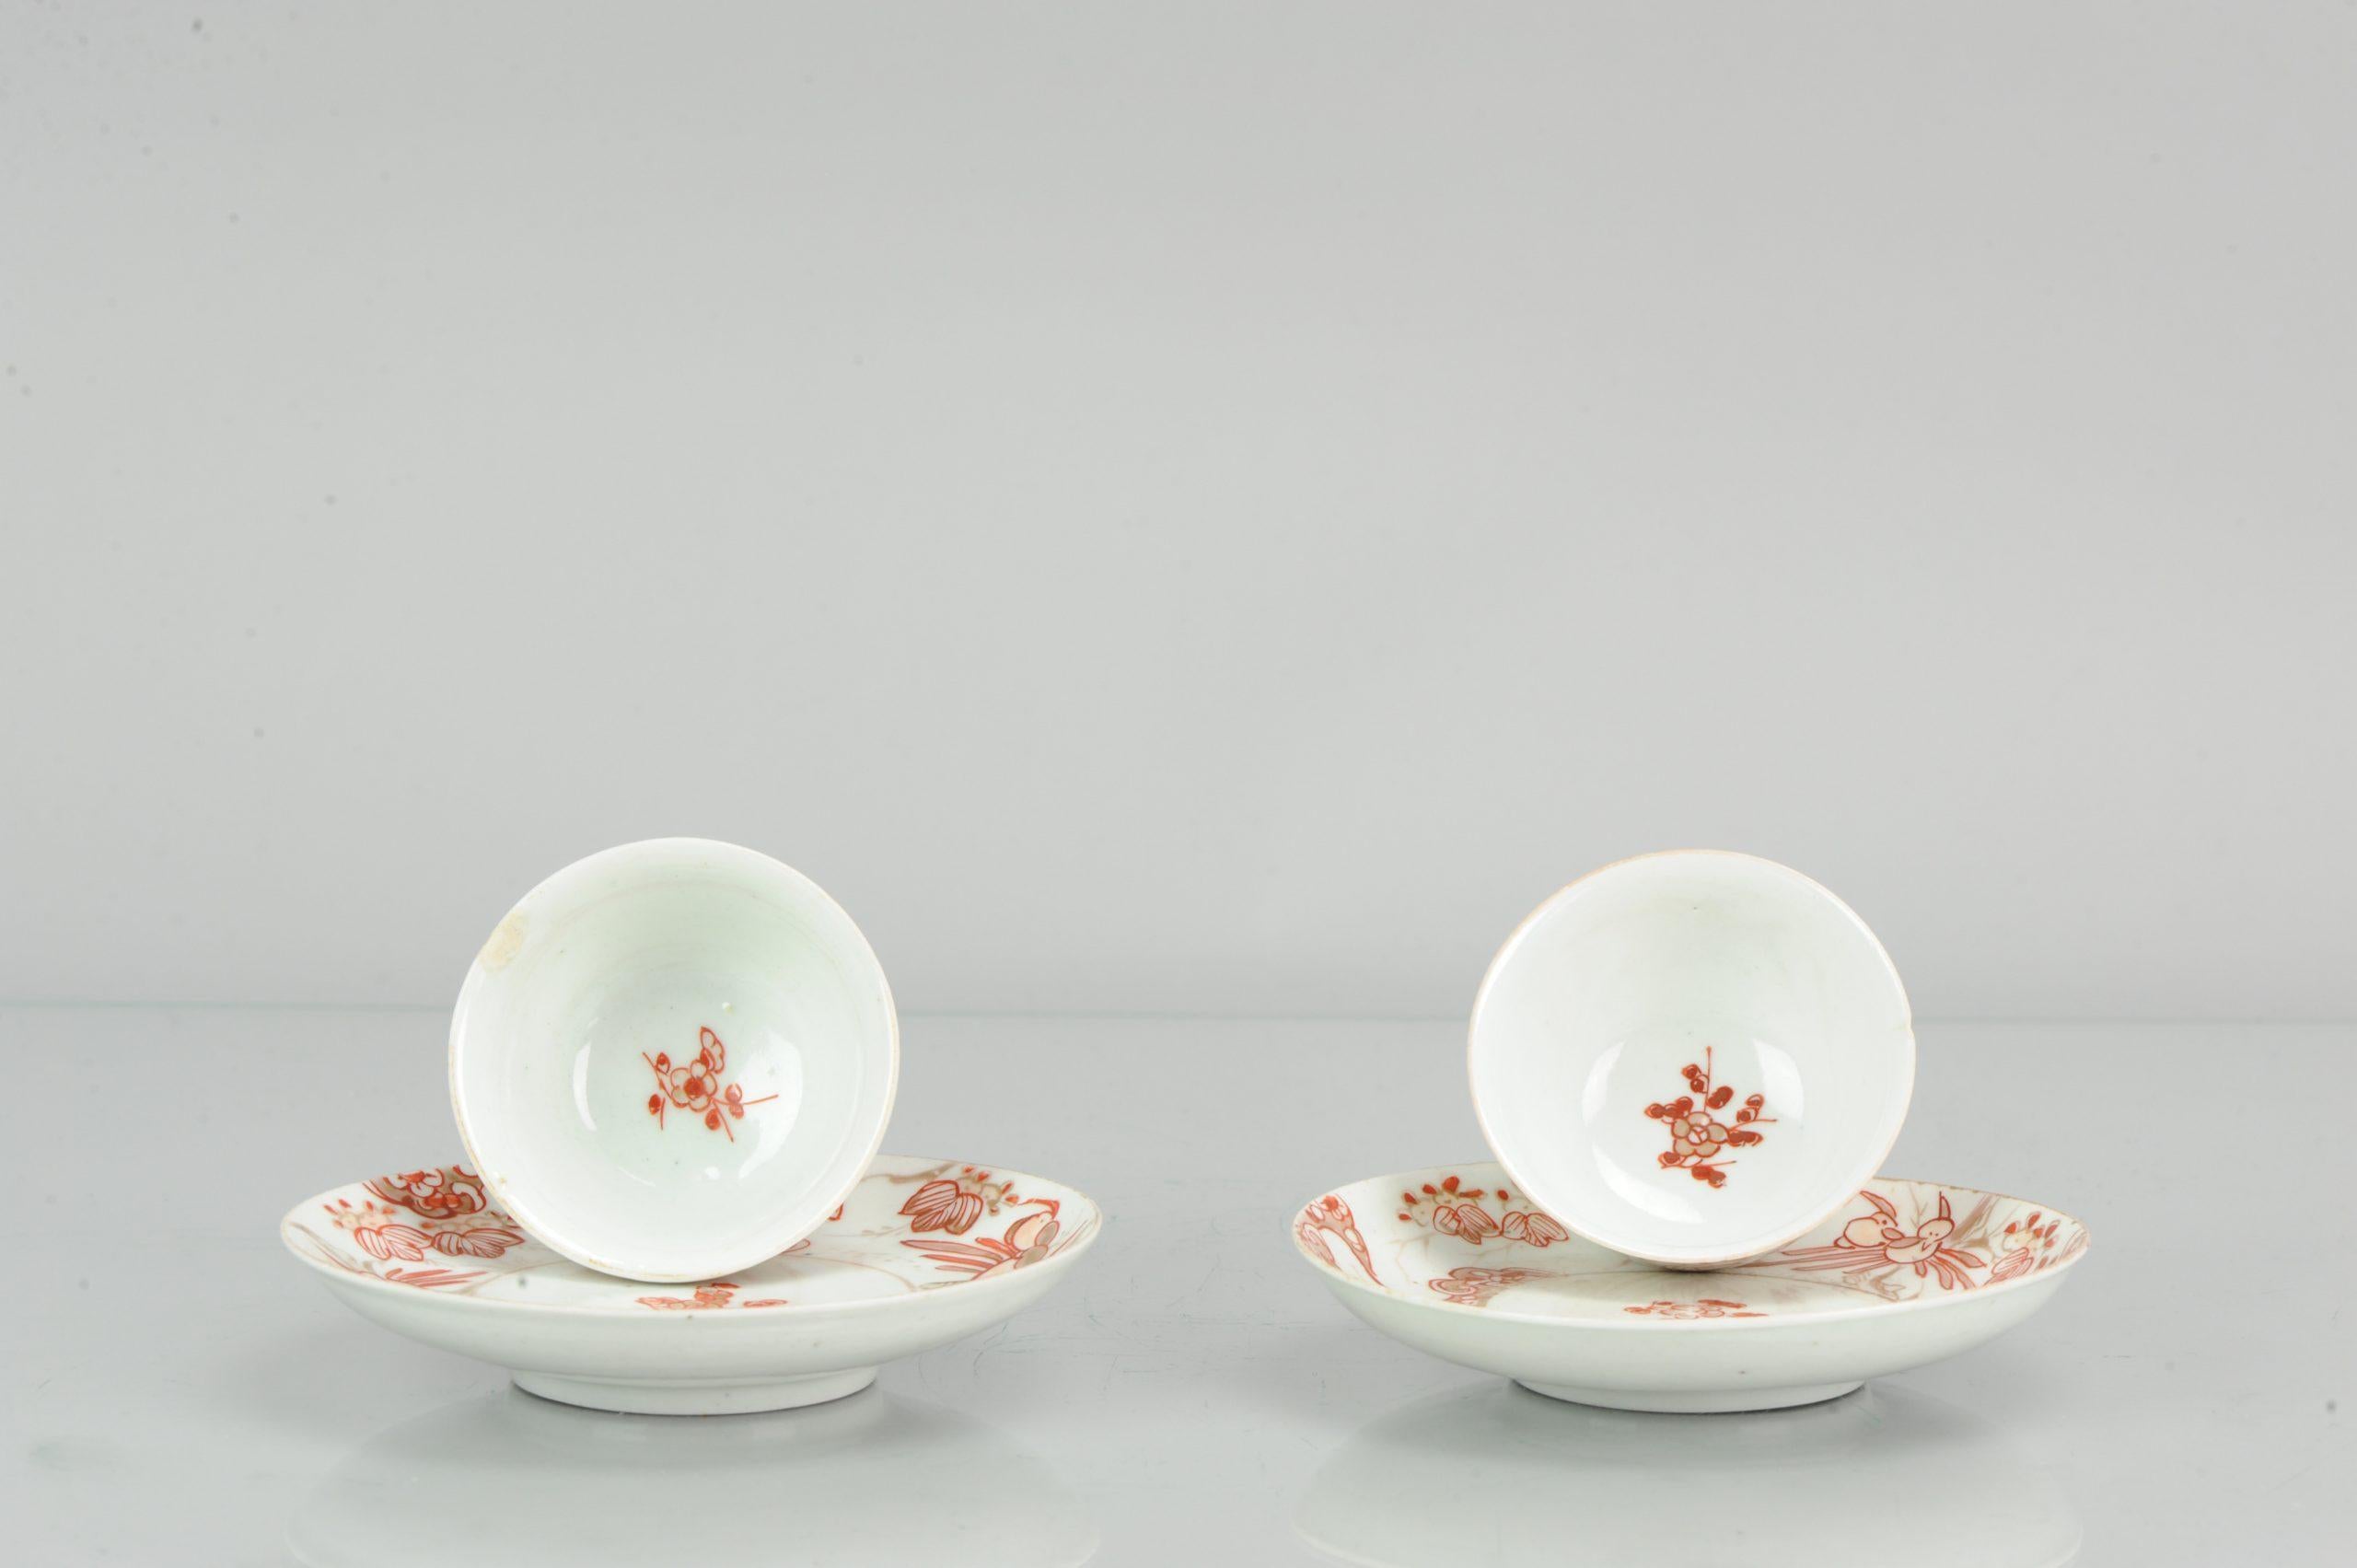 A very nice set of 18th century tea bowls, Edo Period. The painting is of nice quality.

Additional information:
Material: Porcelain & Pottery
Type: Bowls
Region of Origin: Japan
Period: 18th century
Age: Pre-1800
Condition: Overall Condition; Cups;